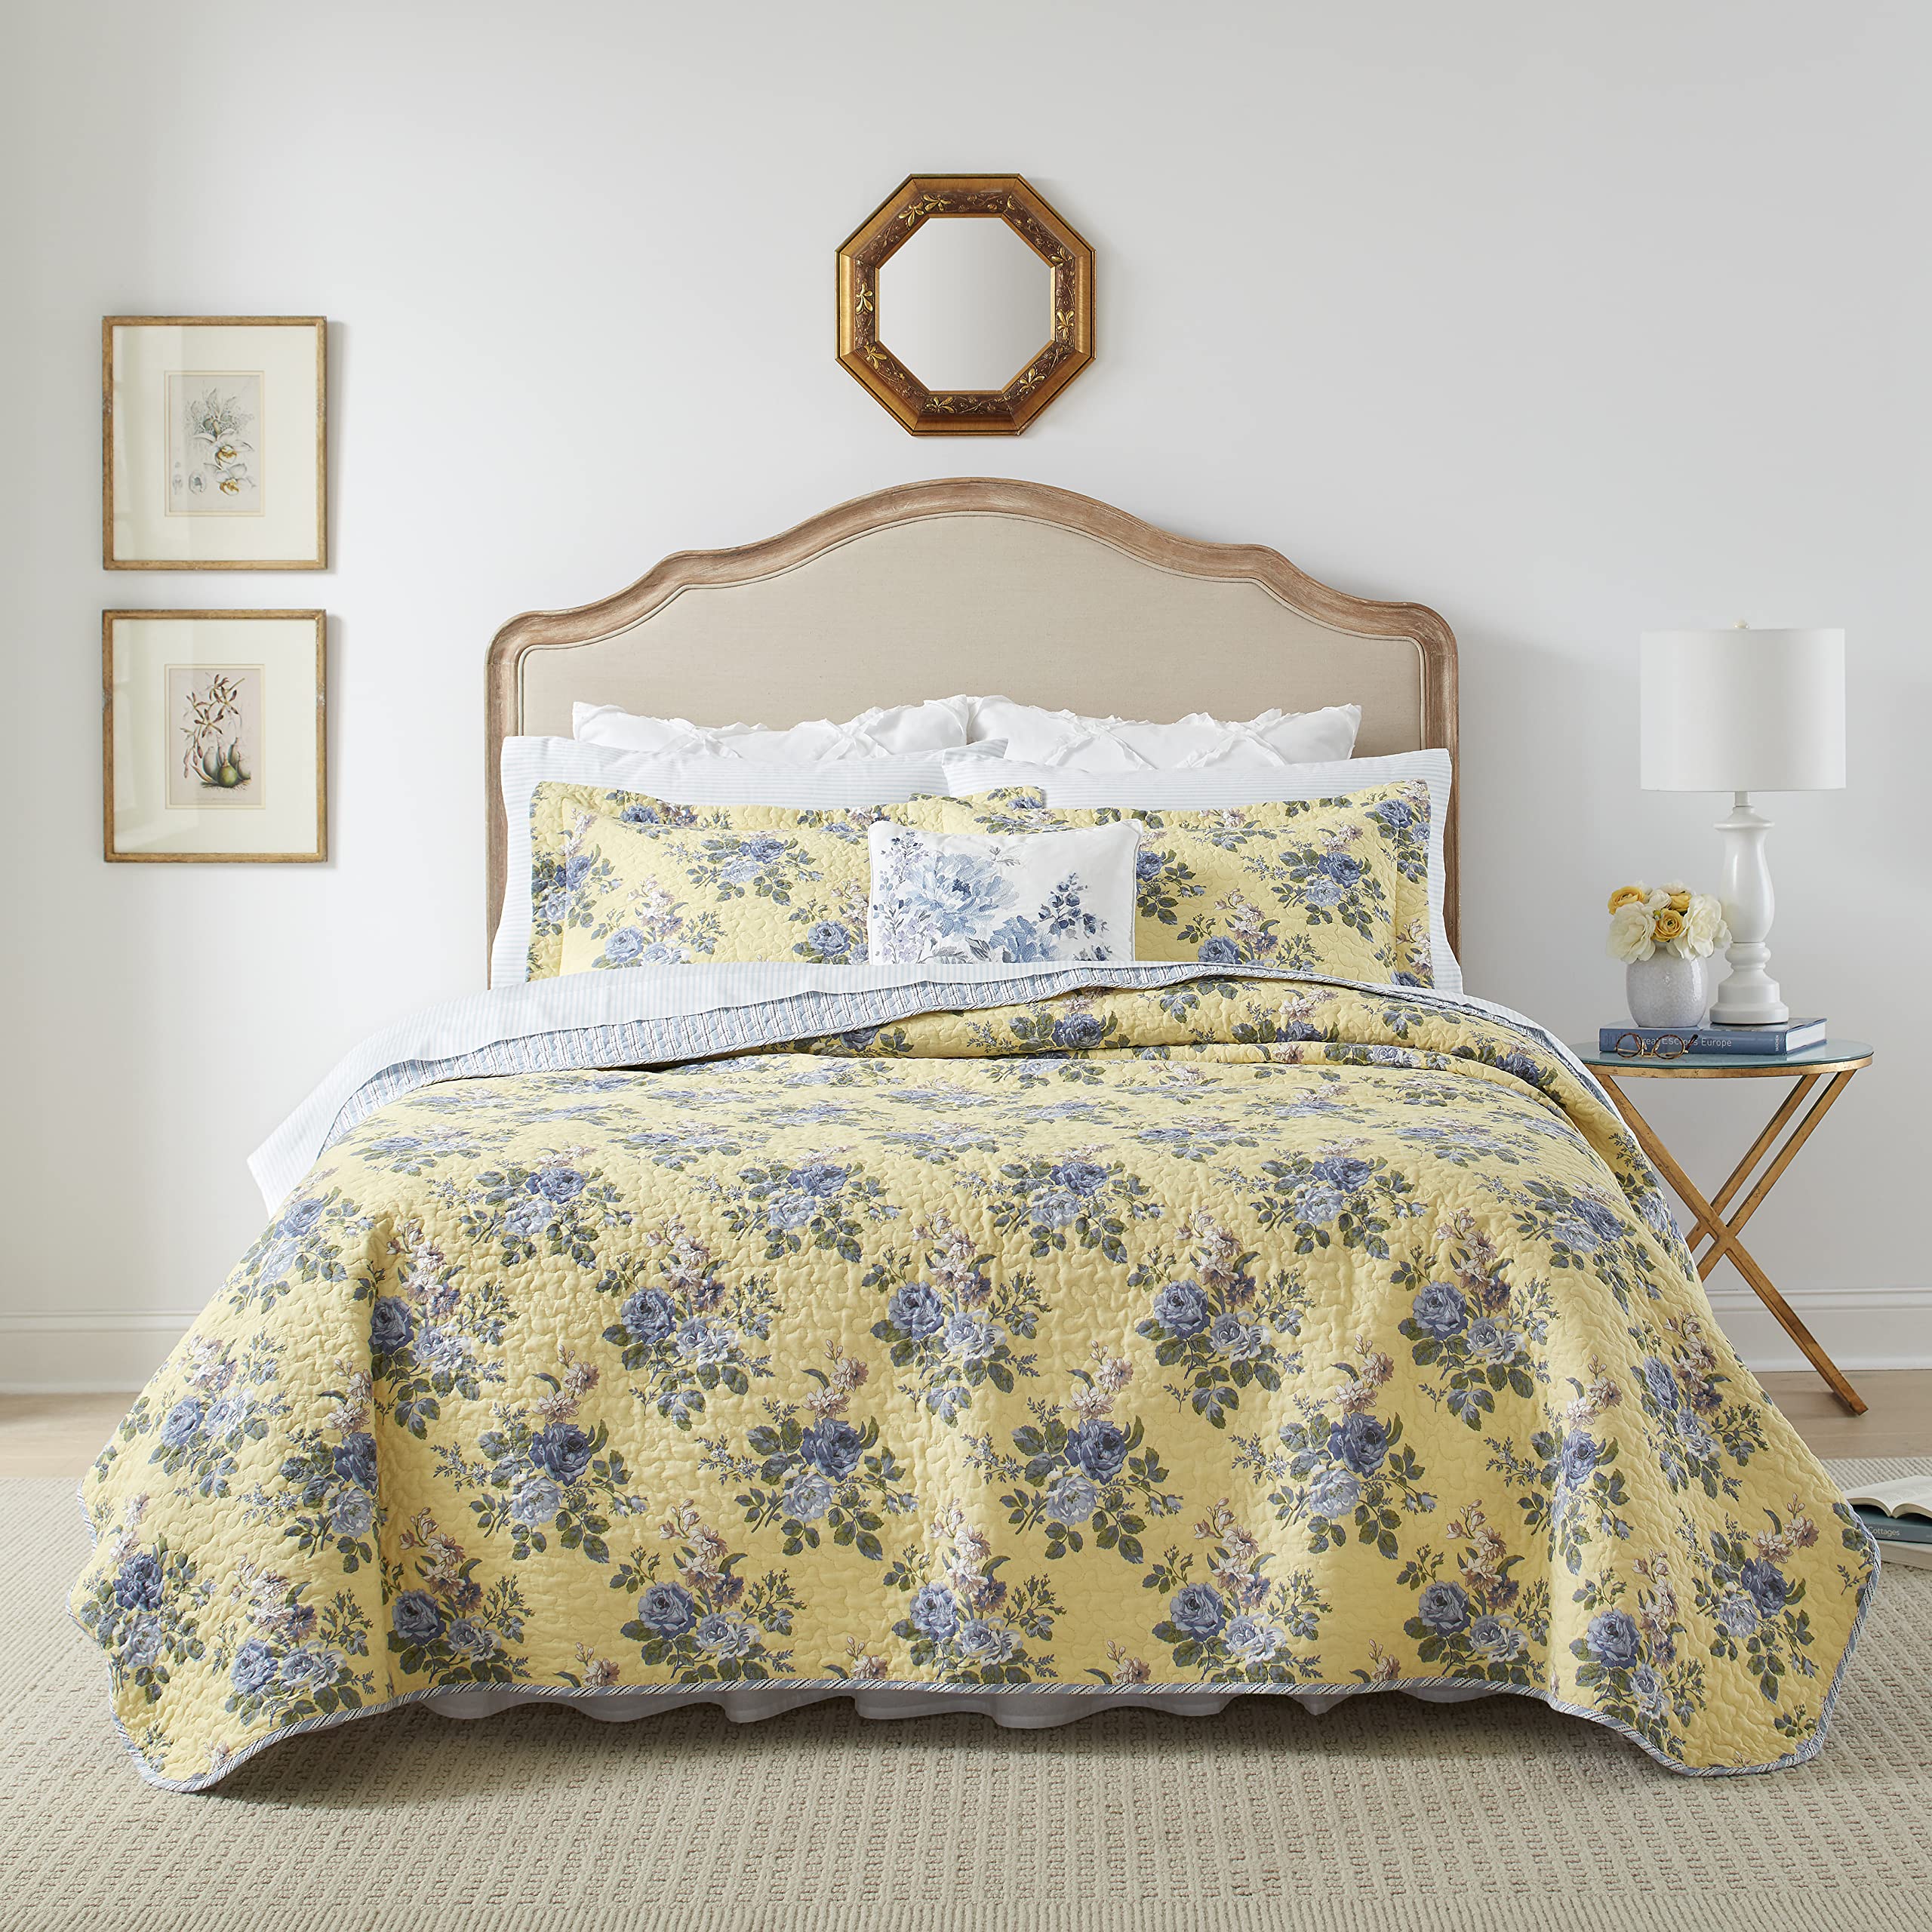 Book Cover Laura Ashley Home Linley Collection Quilt Set-100% Cotton, Reversible, Lightweight & Breathable Bedding, Pre-Washed for Added Softness, Twin, Pale Yellow